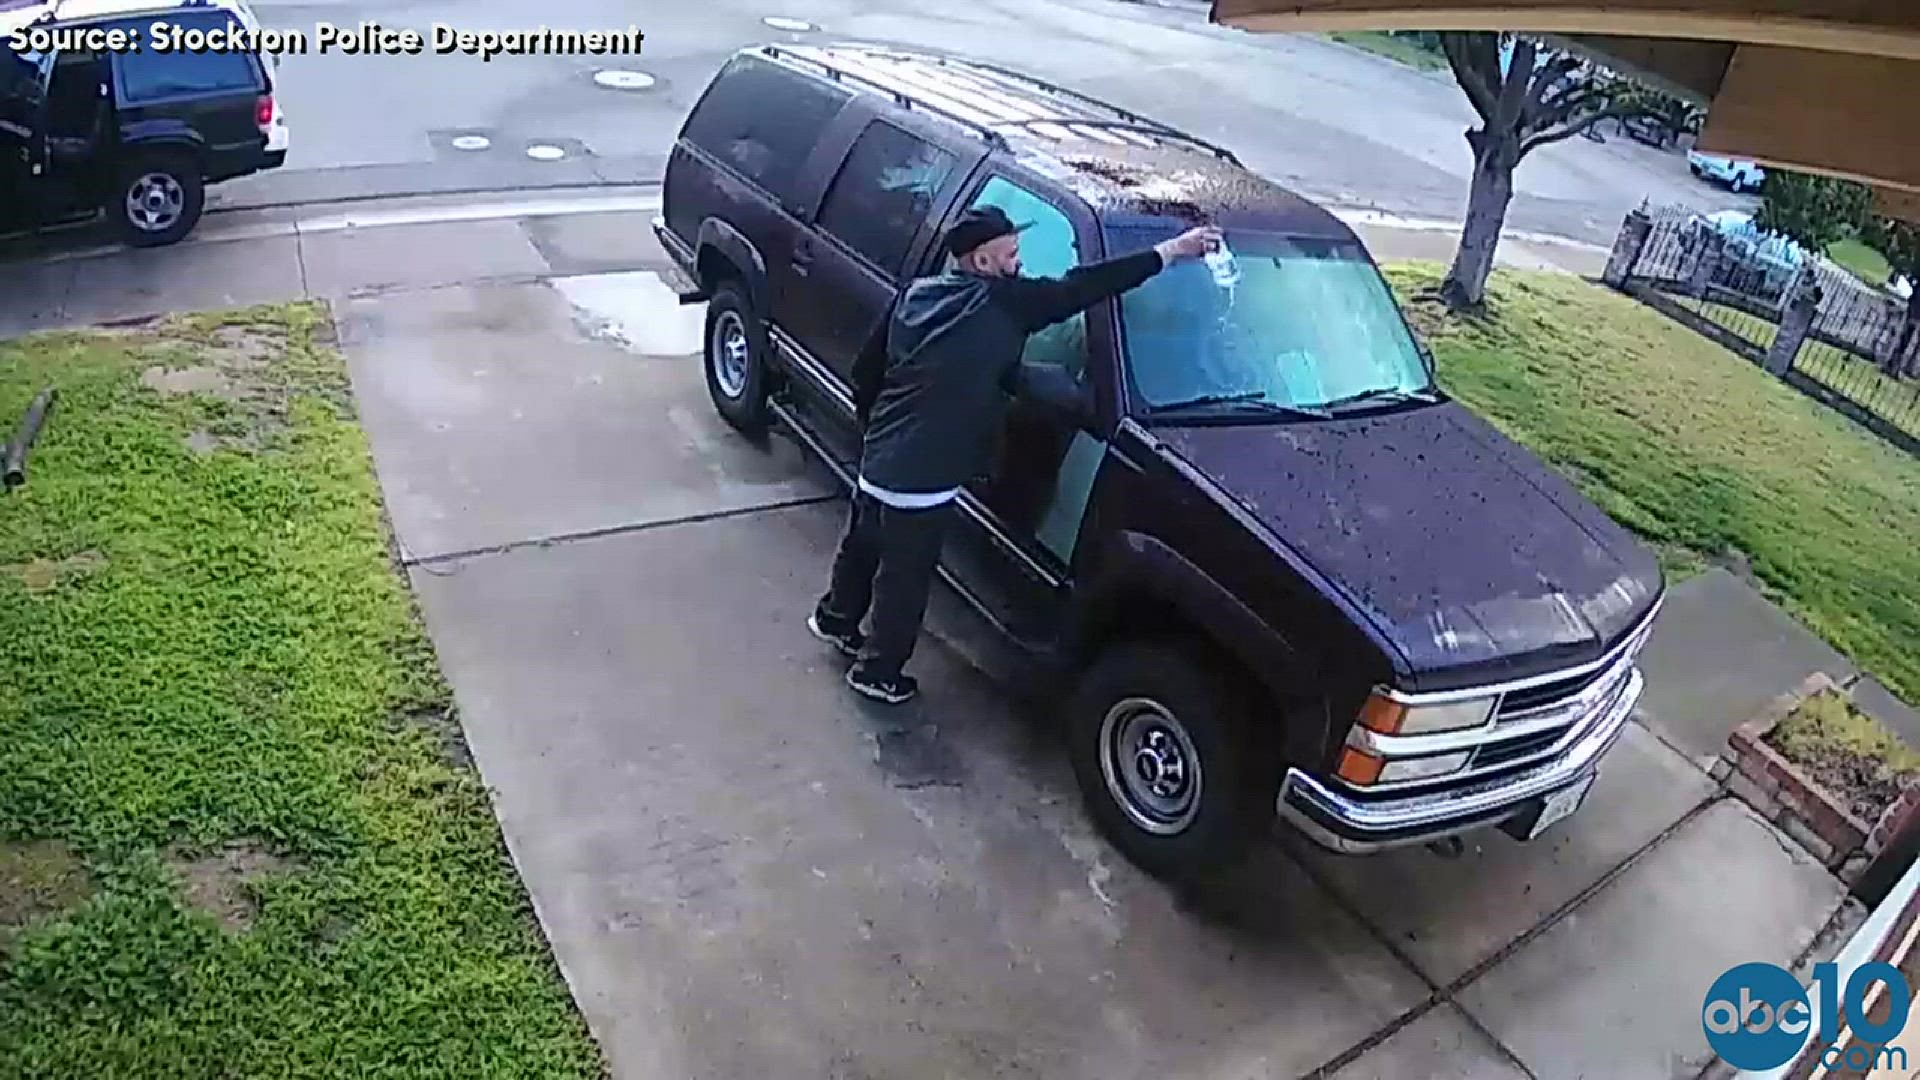 The Stockton Police Department is searching for man who set fire to a car outside a home.